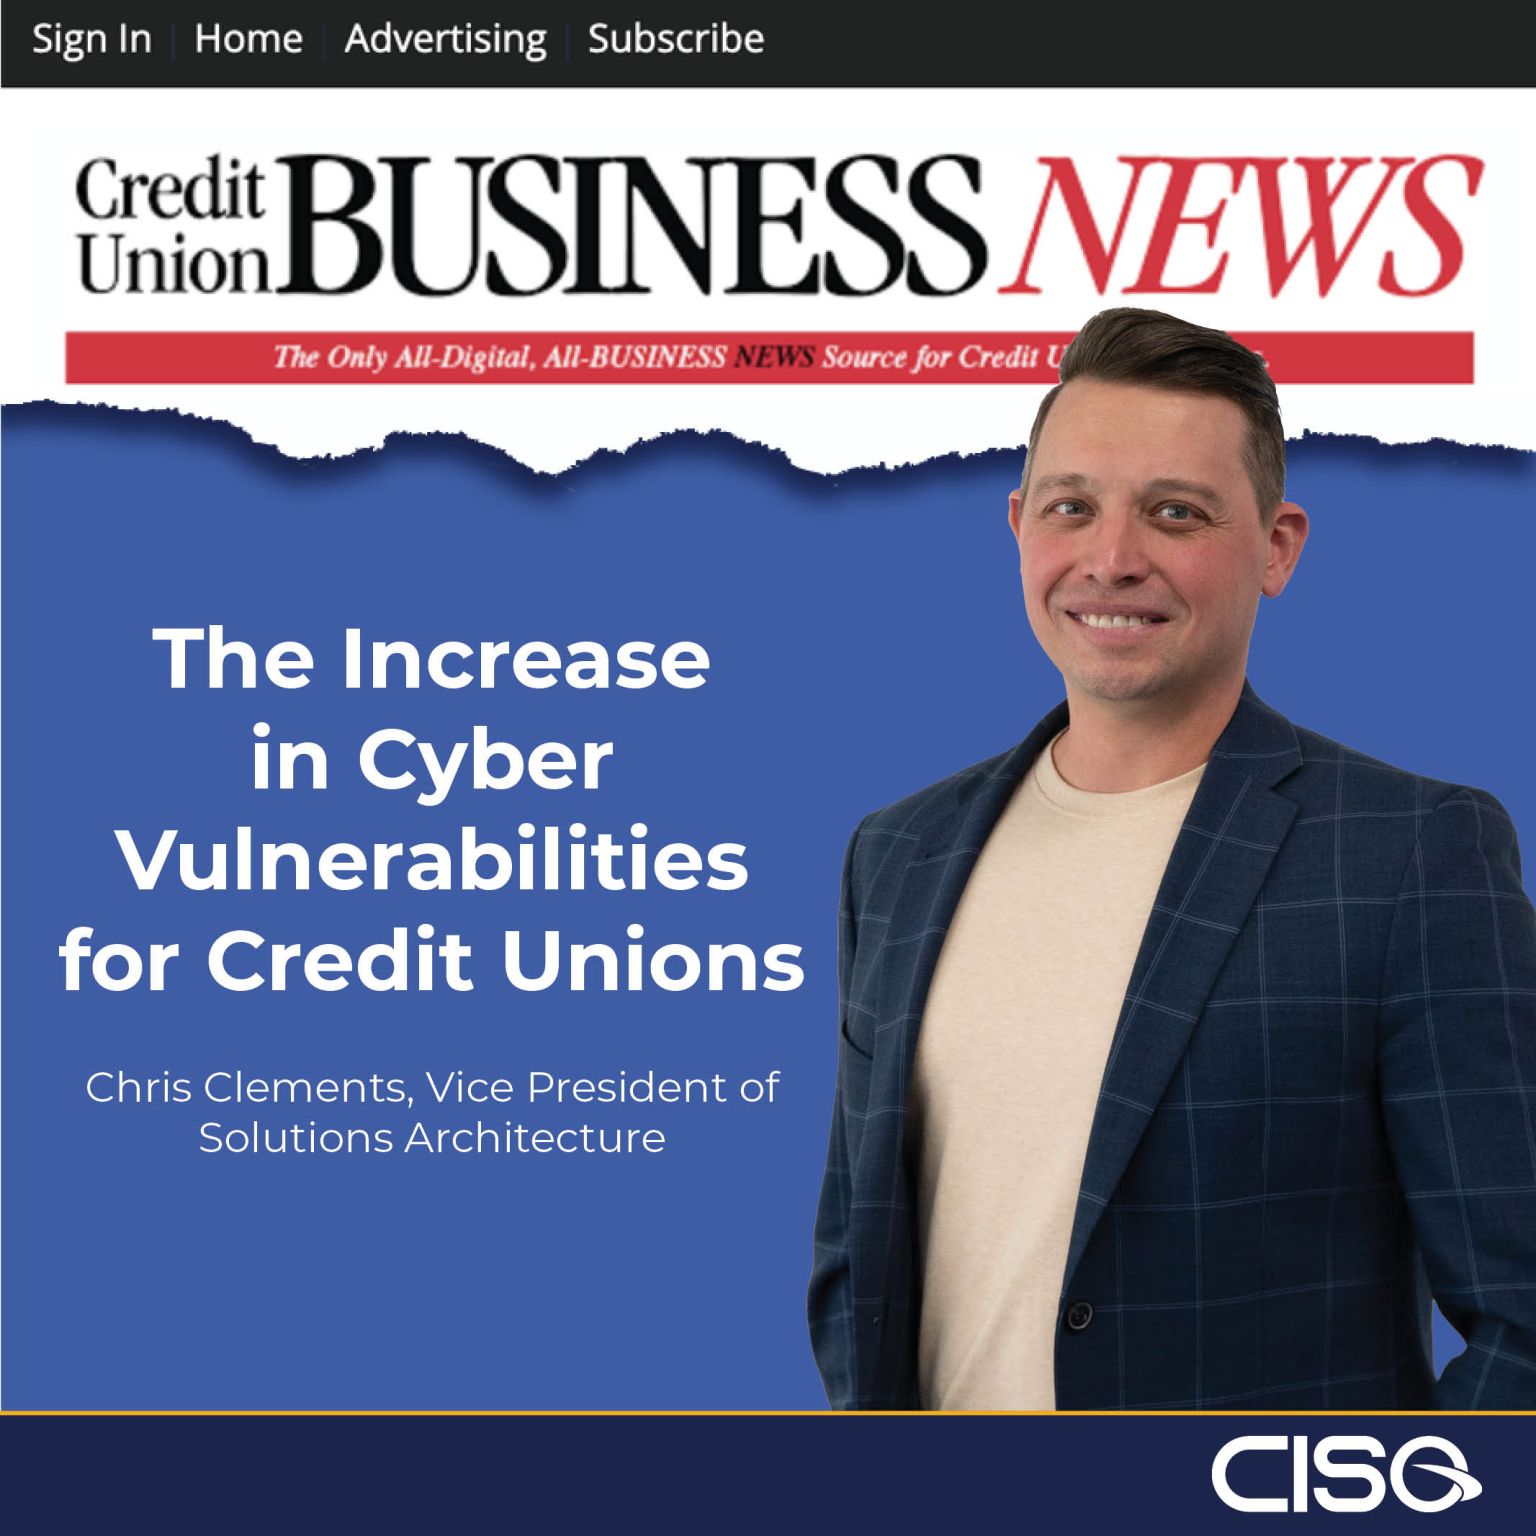 The Increase in Cyber Vulnerabilities for Credit Unions